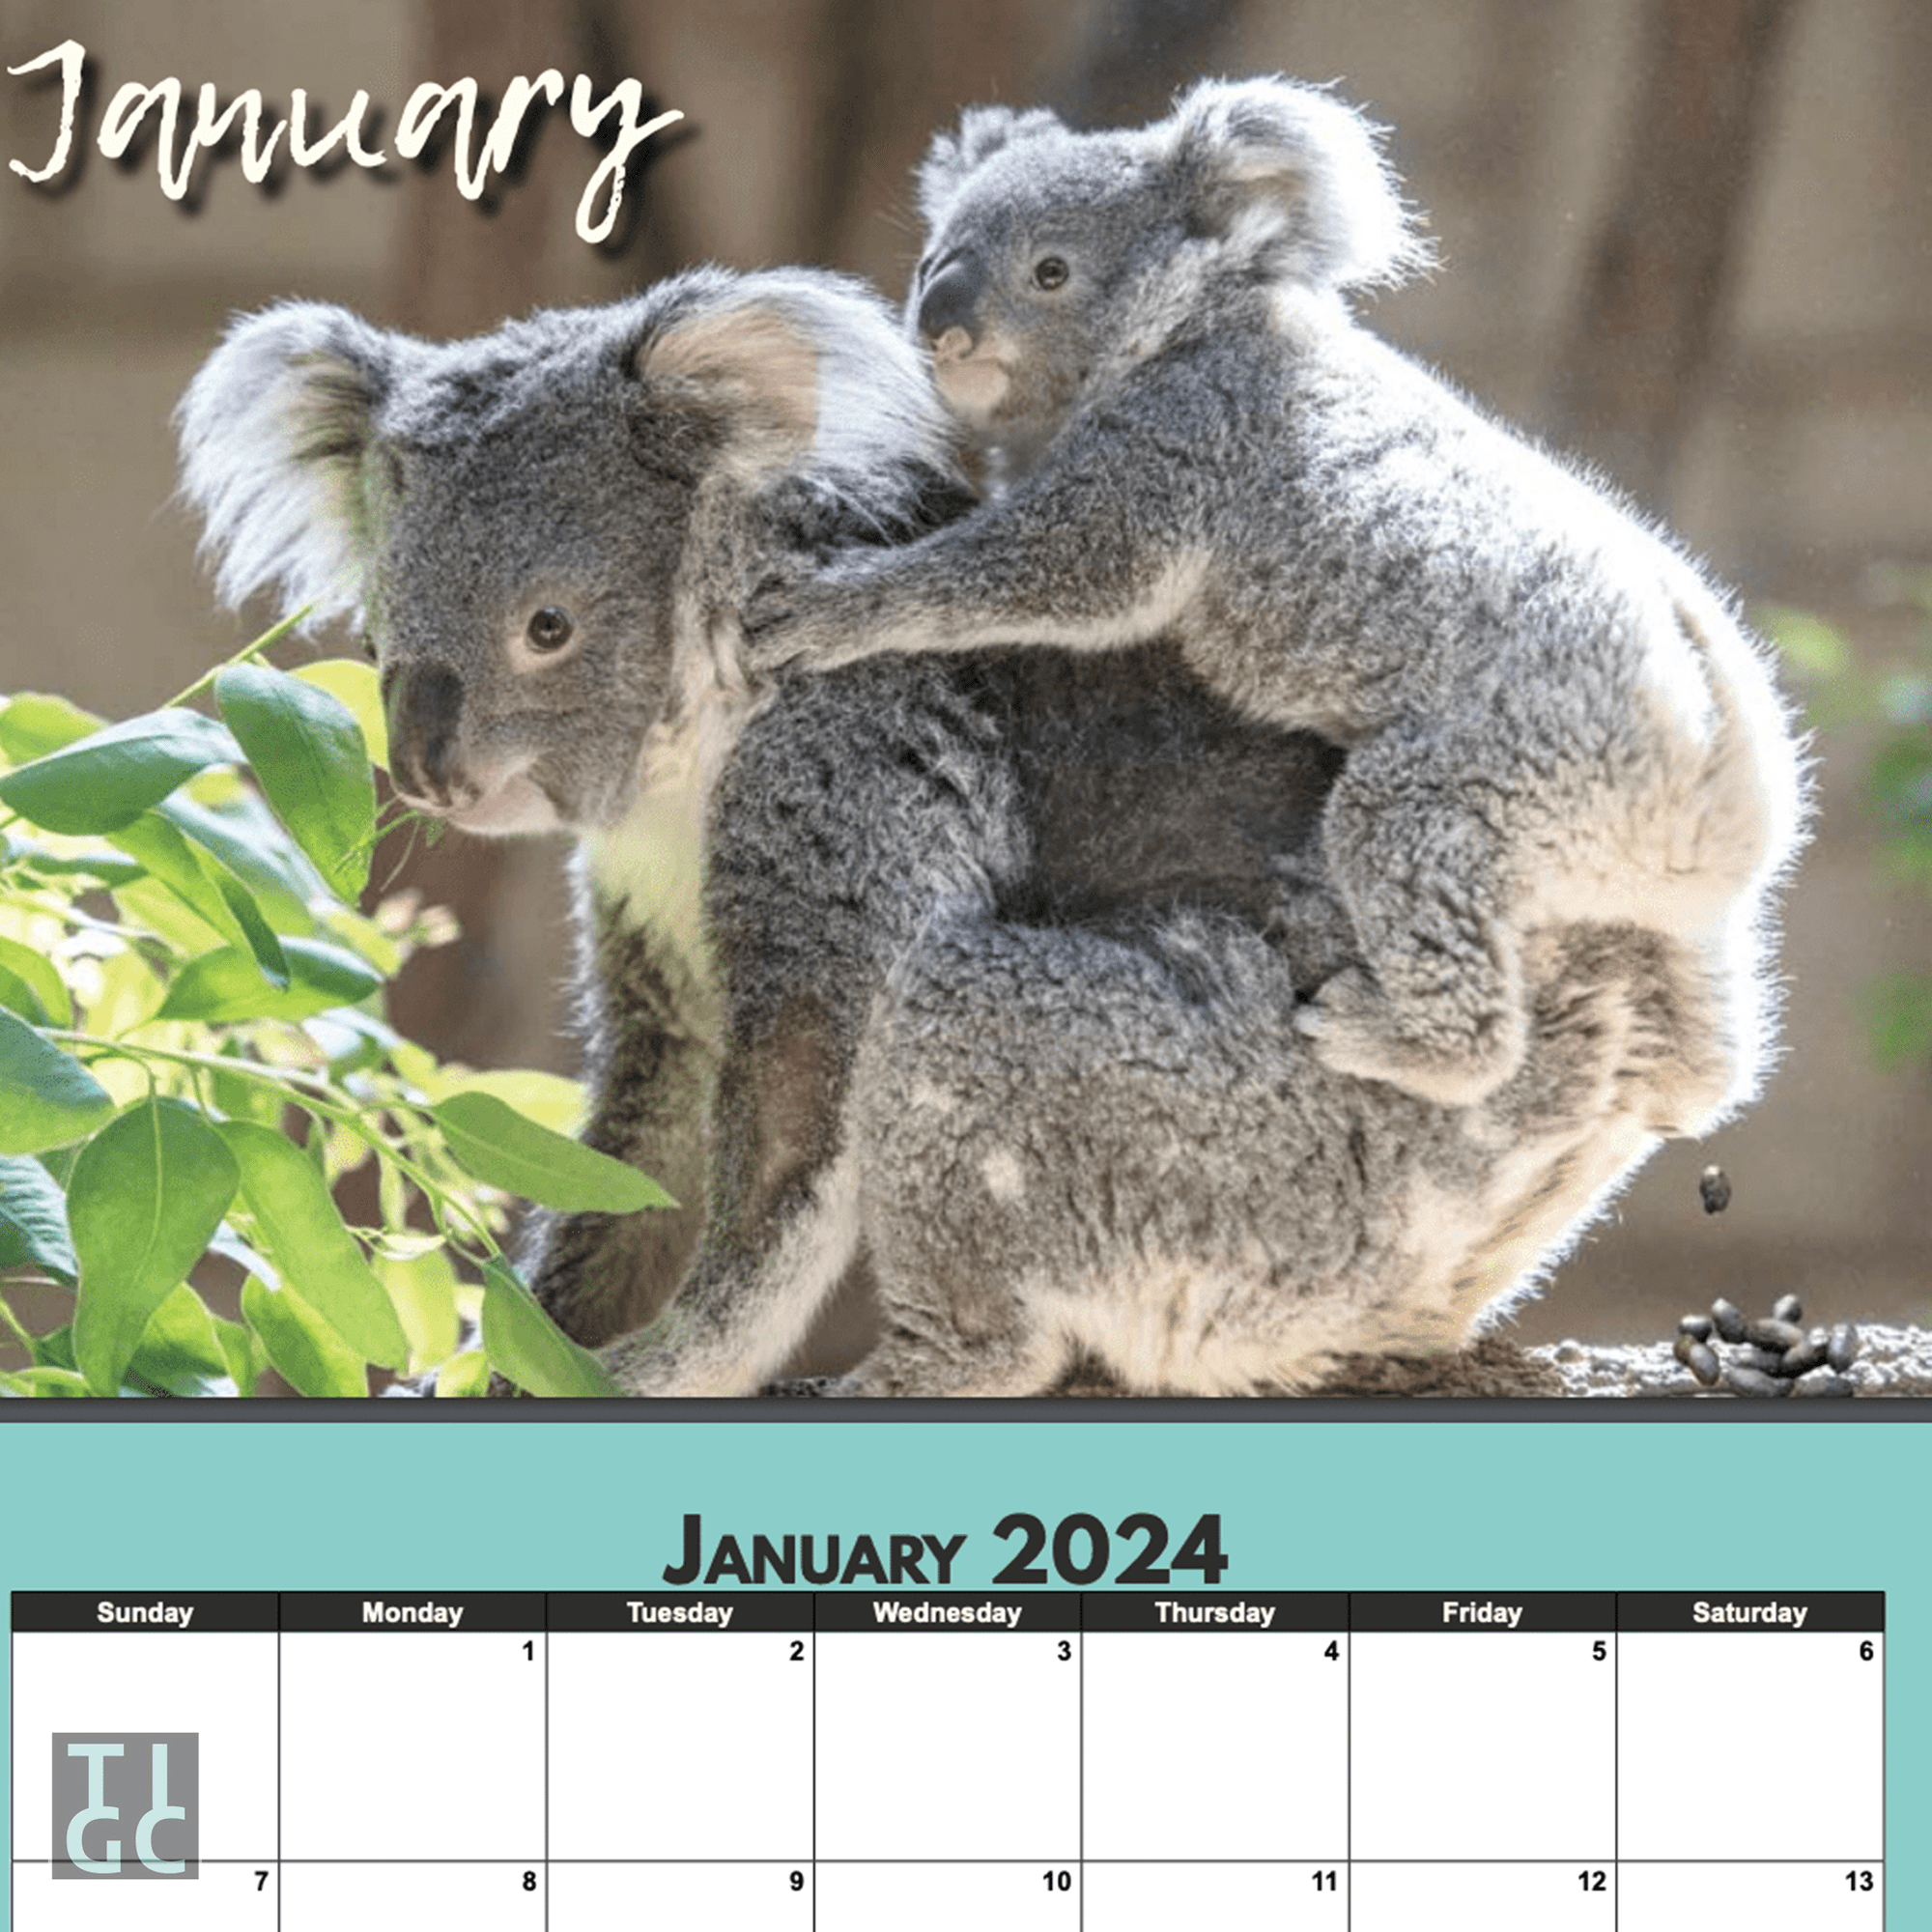 TIGC The Inappropriate Gift Co Shitty Calendar 2024 - Baby Animals Edition